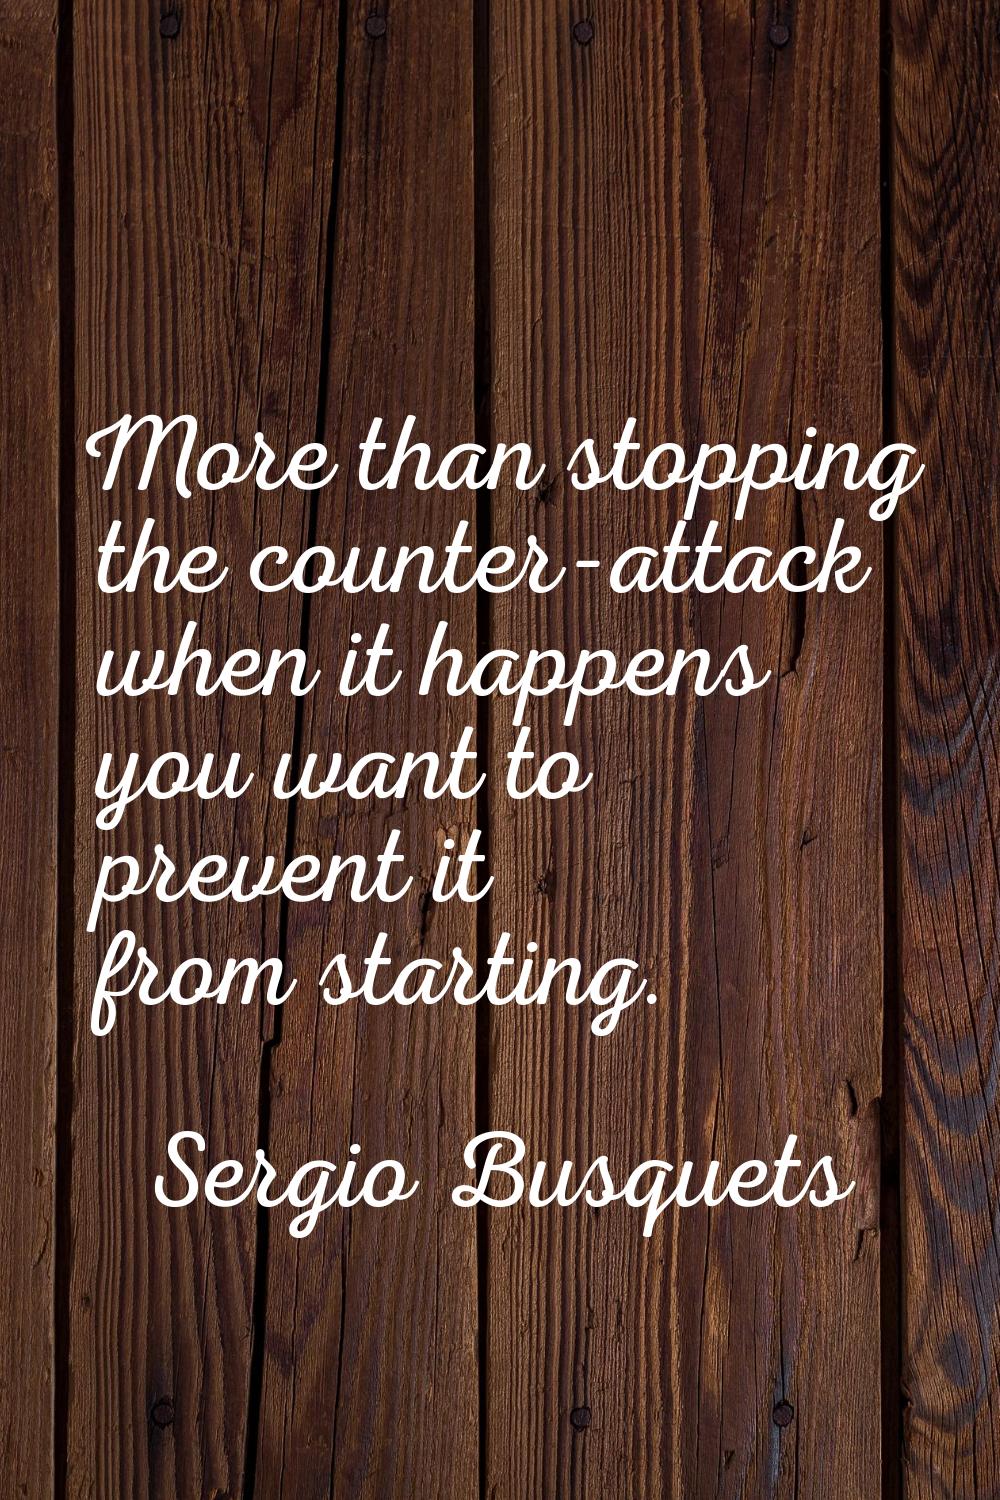 More than stopping the counter-attack when it happens you want to prevent it from starting.